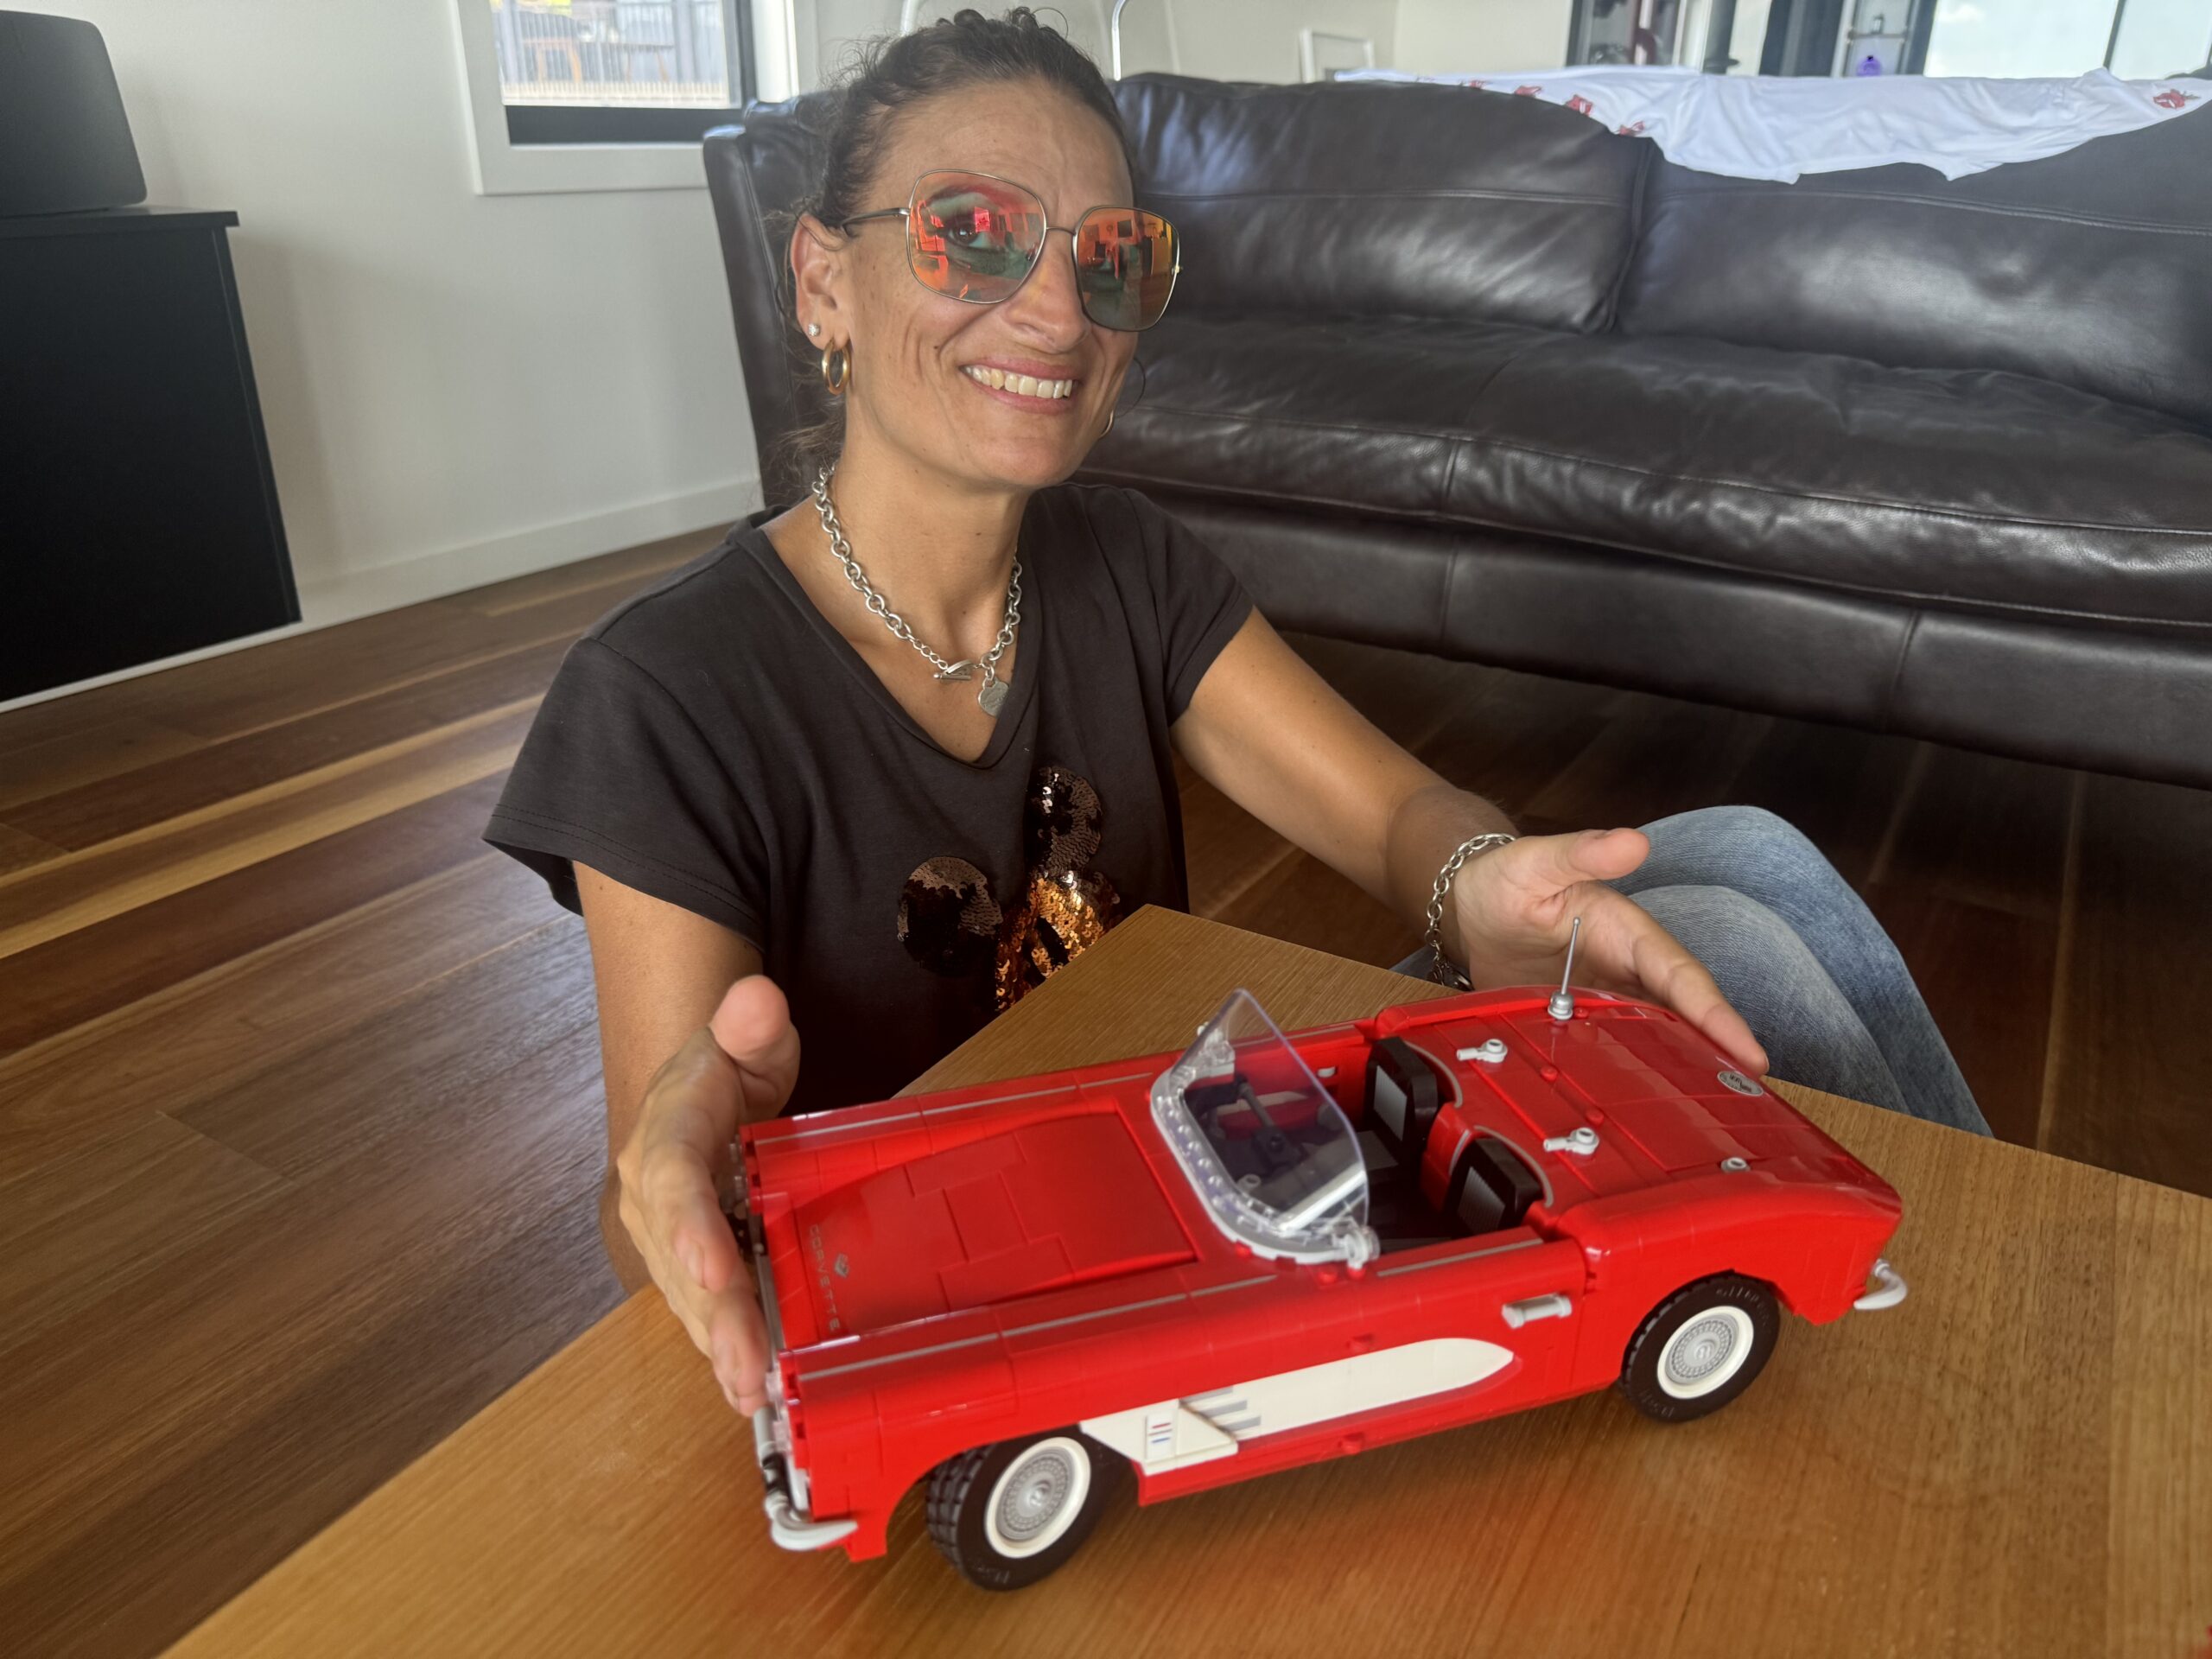 Renee, a woman wearing red shades built lego Chevrolet Corvette 1971.Renee, a woman wearing red shades built lego Chevrolet Corvette 1971.